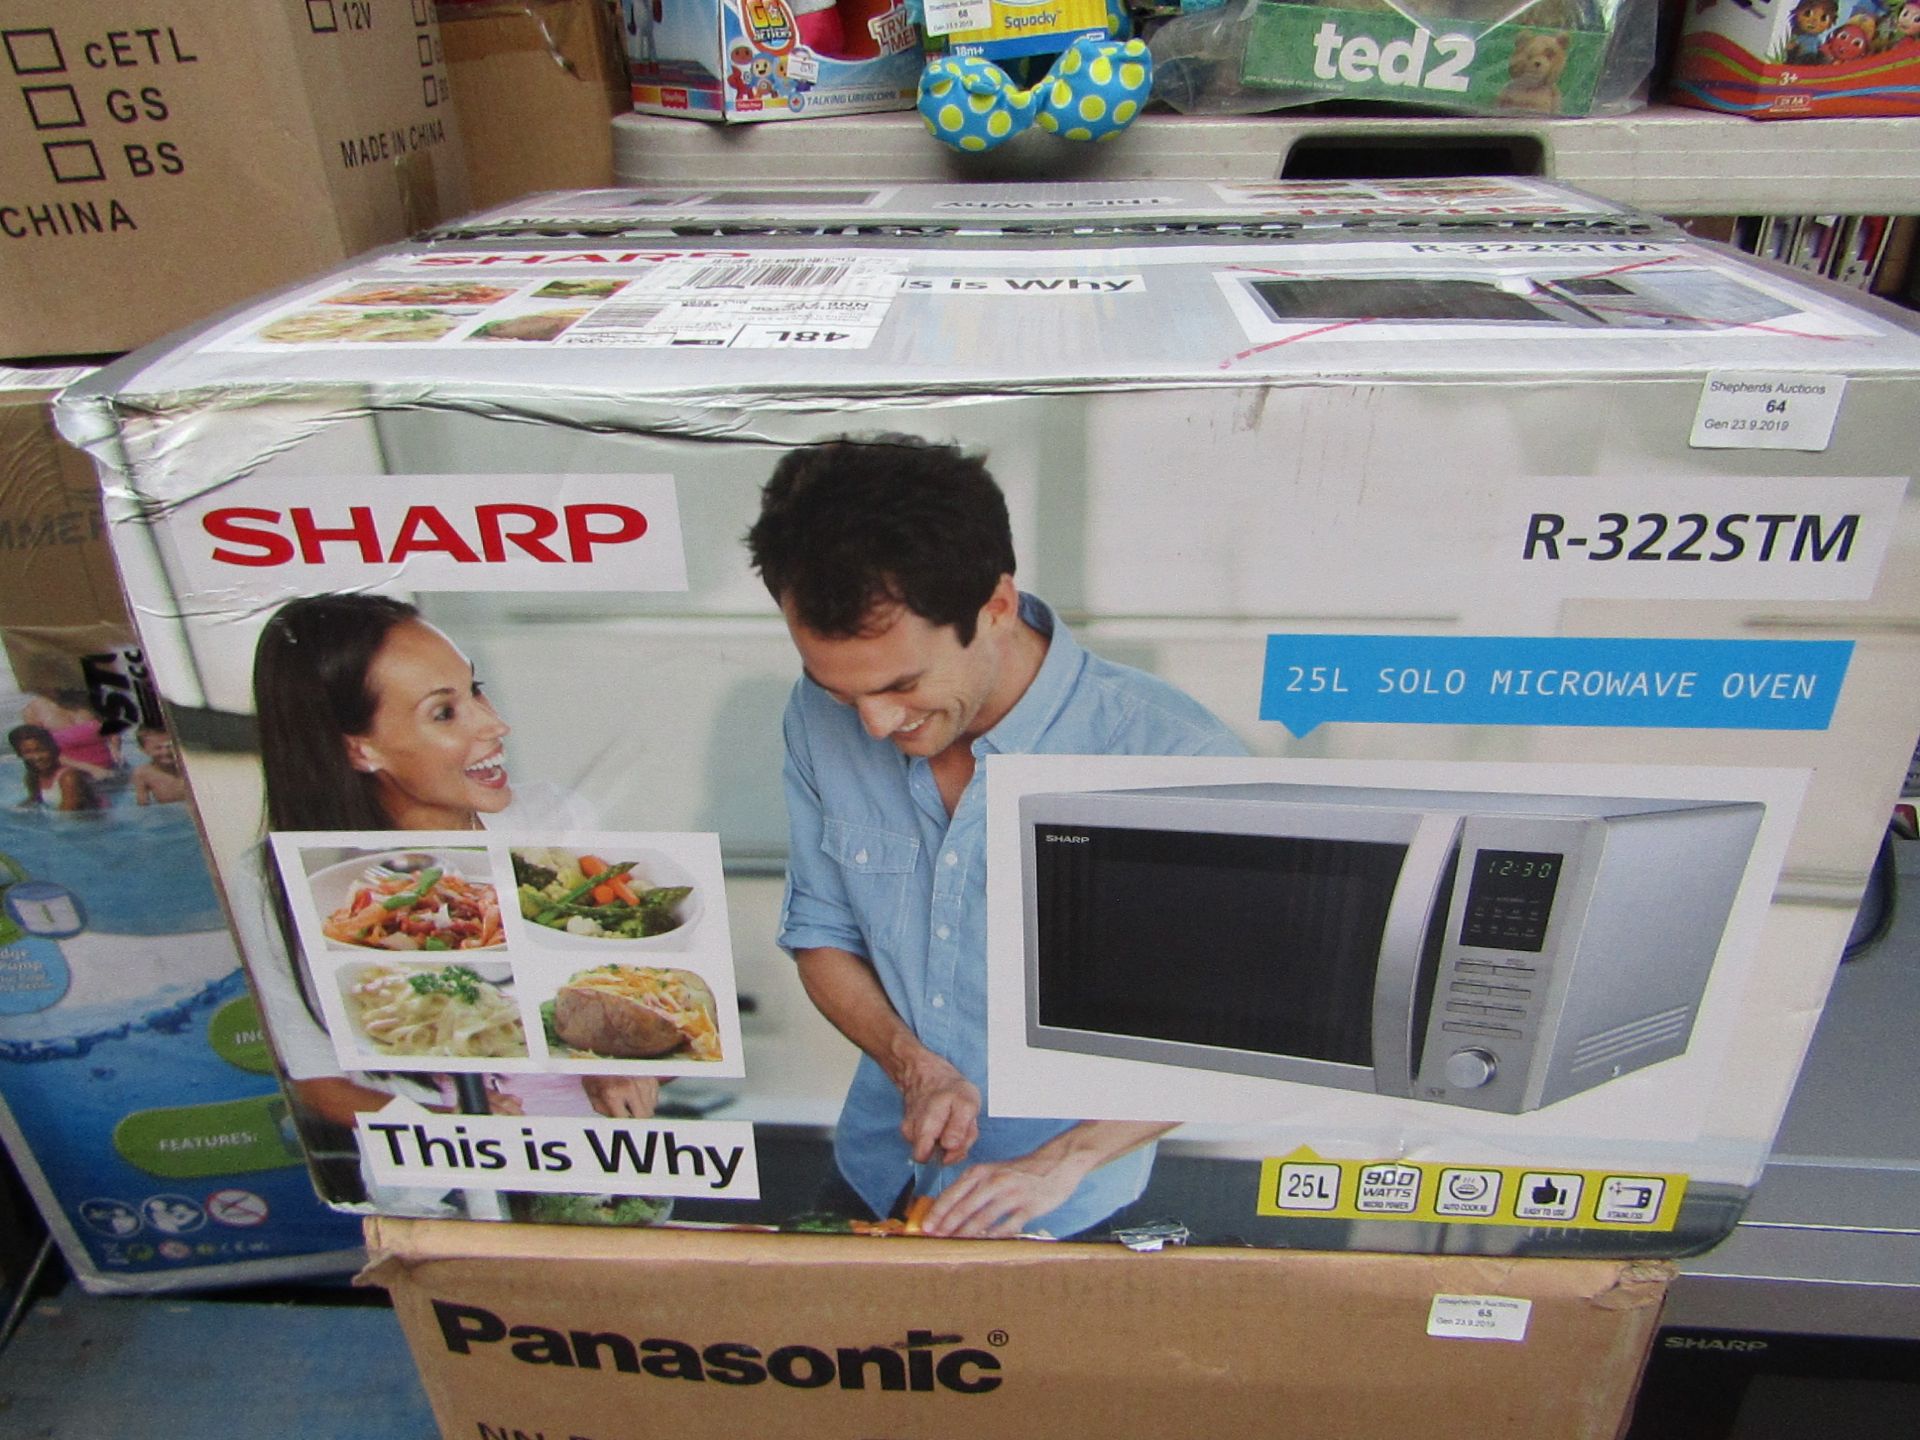 Sharp 25L Solo Microwave Oven.Boxed but unchecked